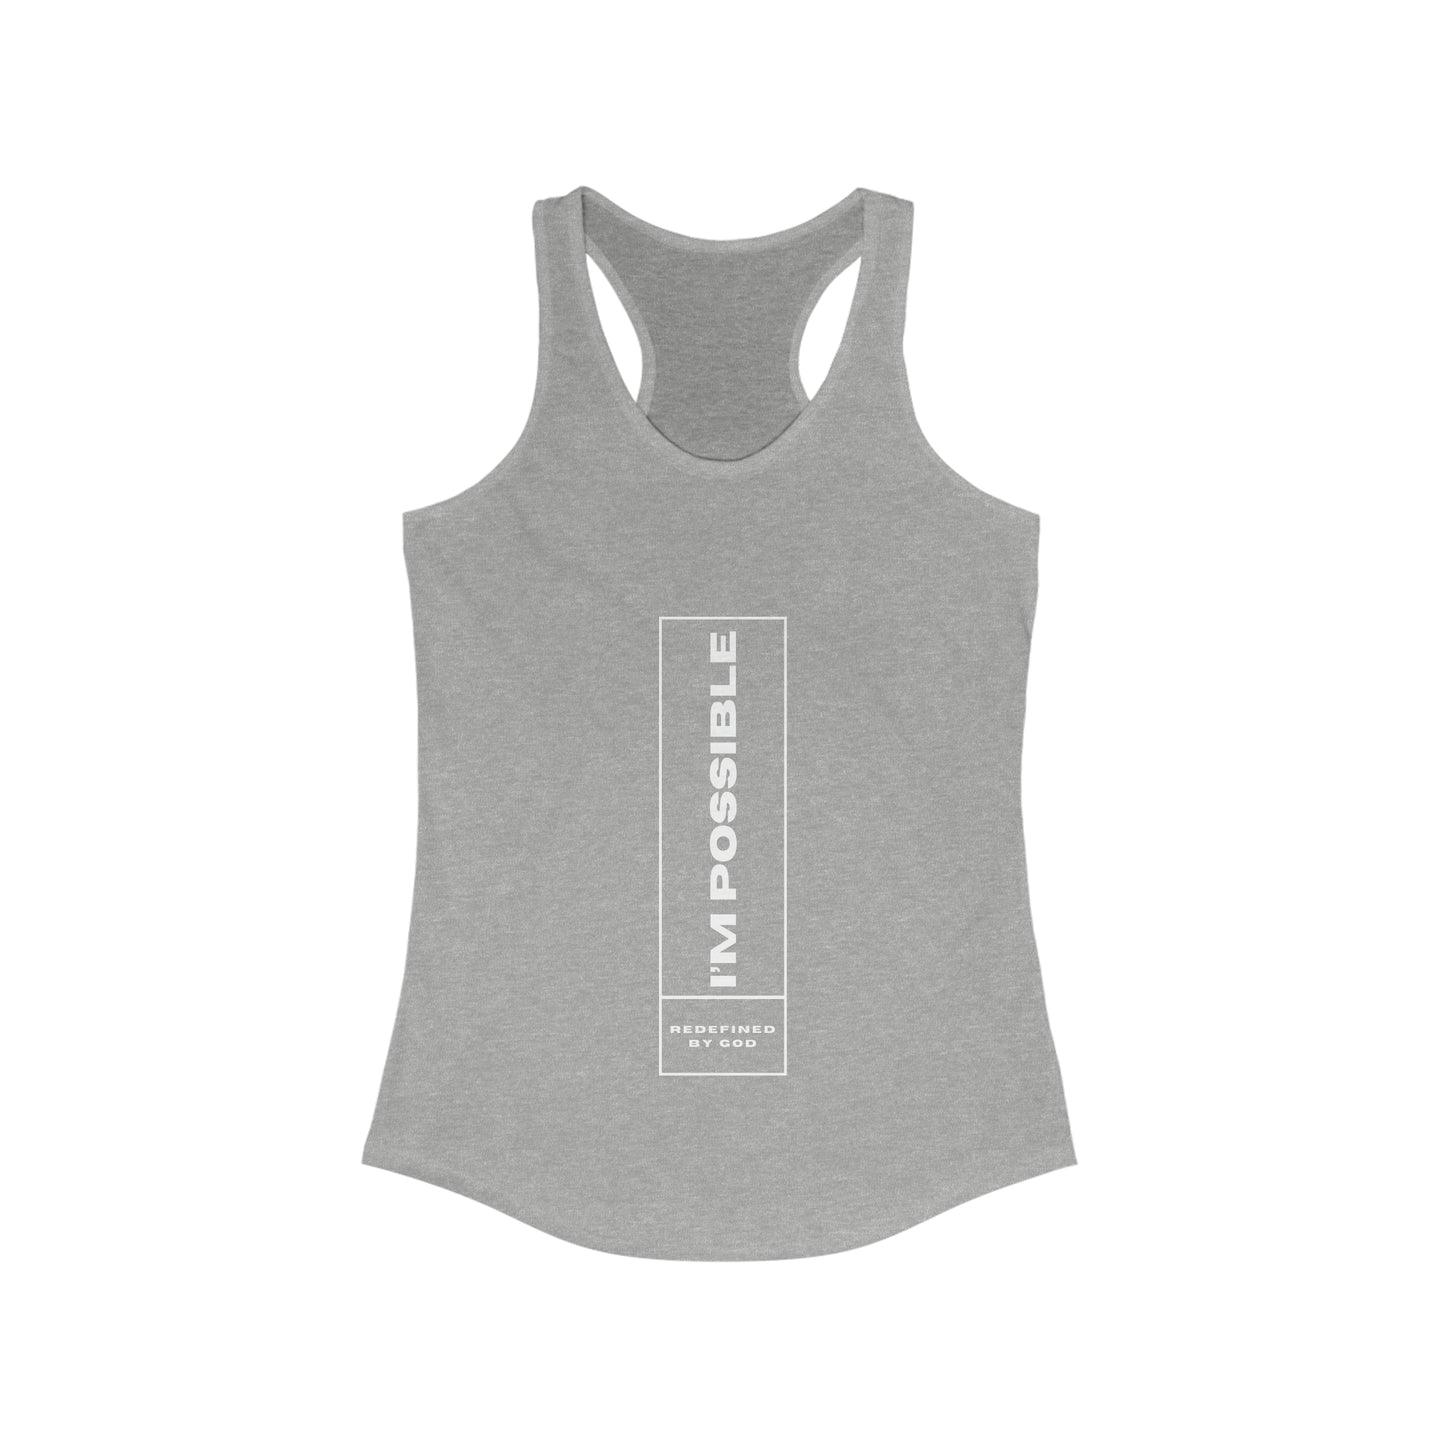 I'm Possible Redefined By God Slim Fit Tank-top Printify